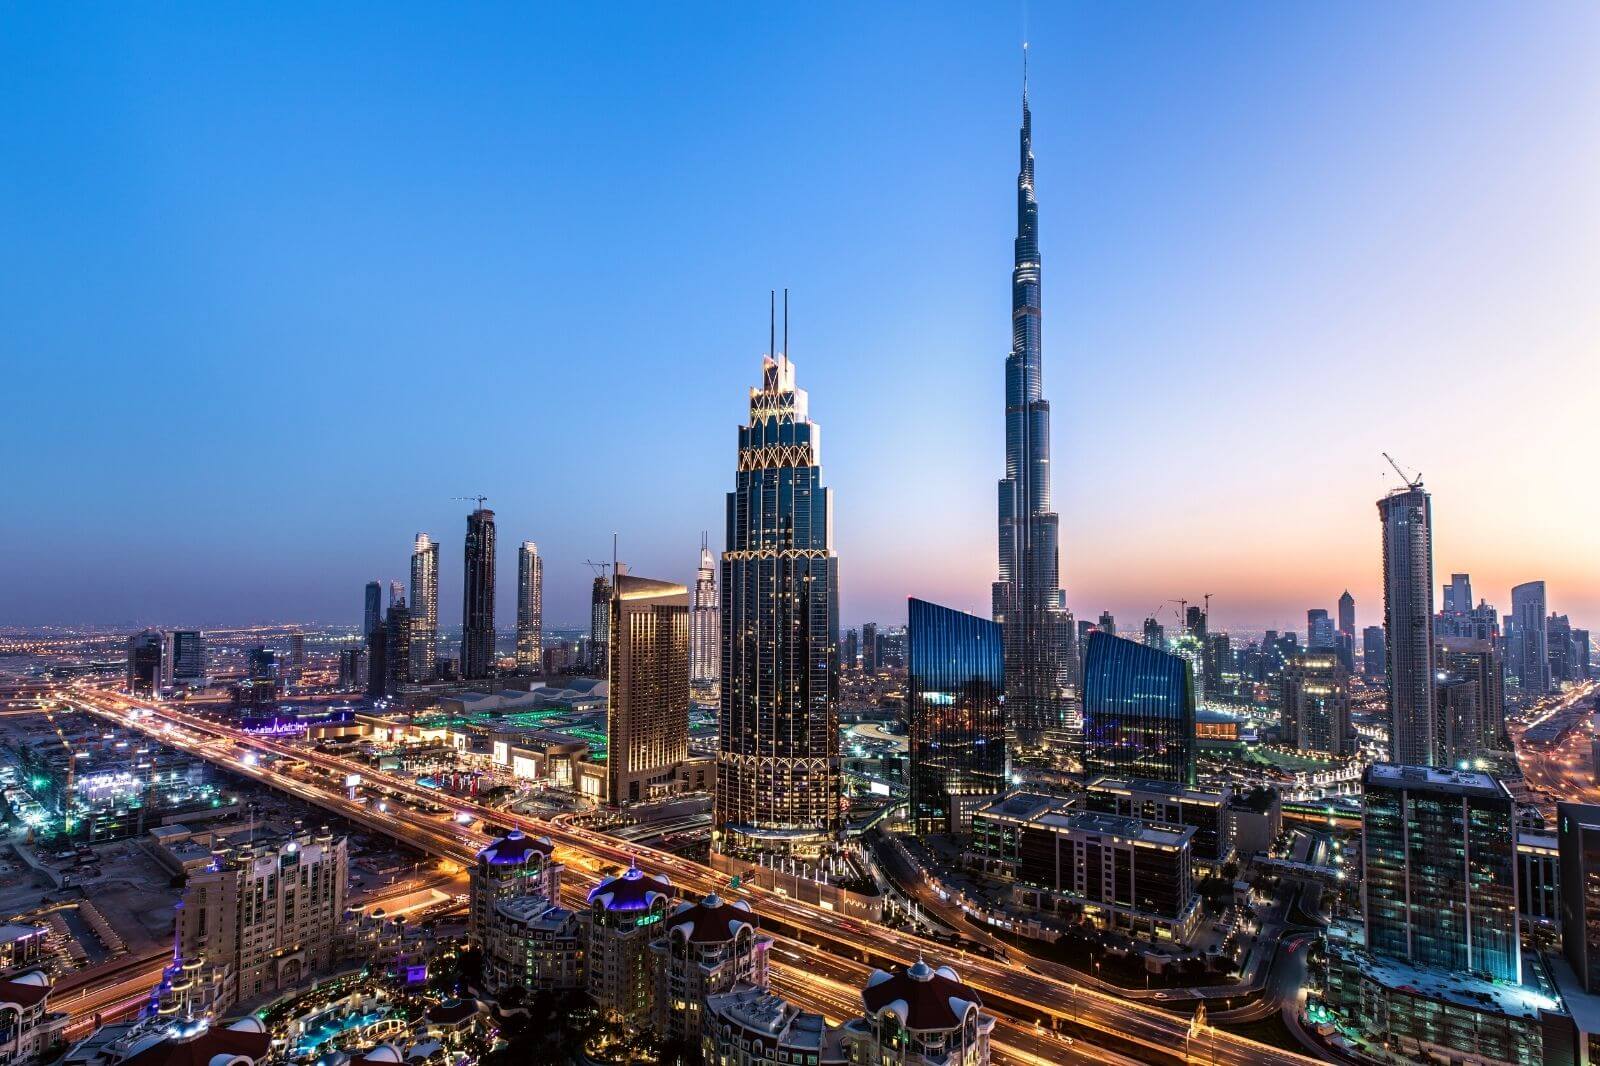 Top 11 Closest Hotels to Dubai Expo 2020 under $100